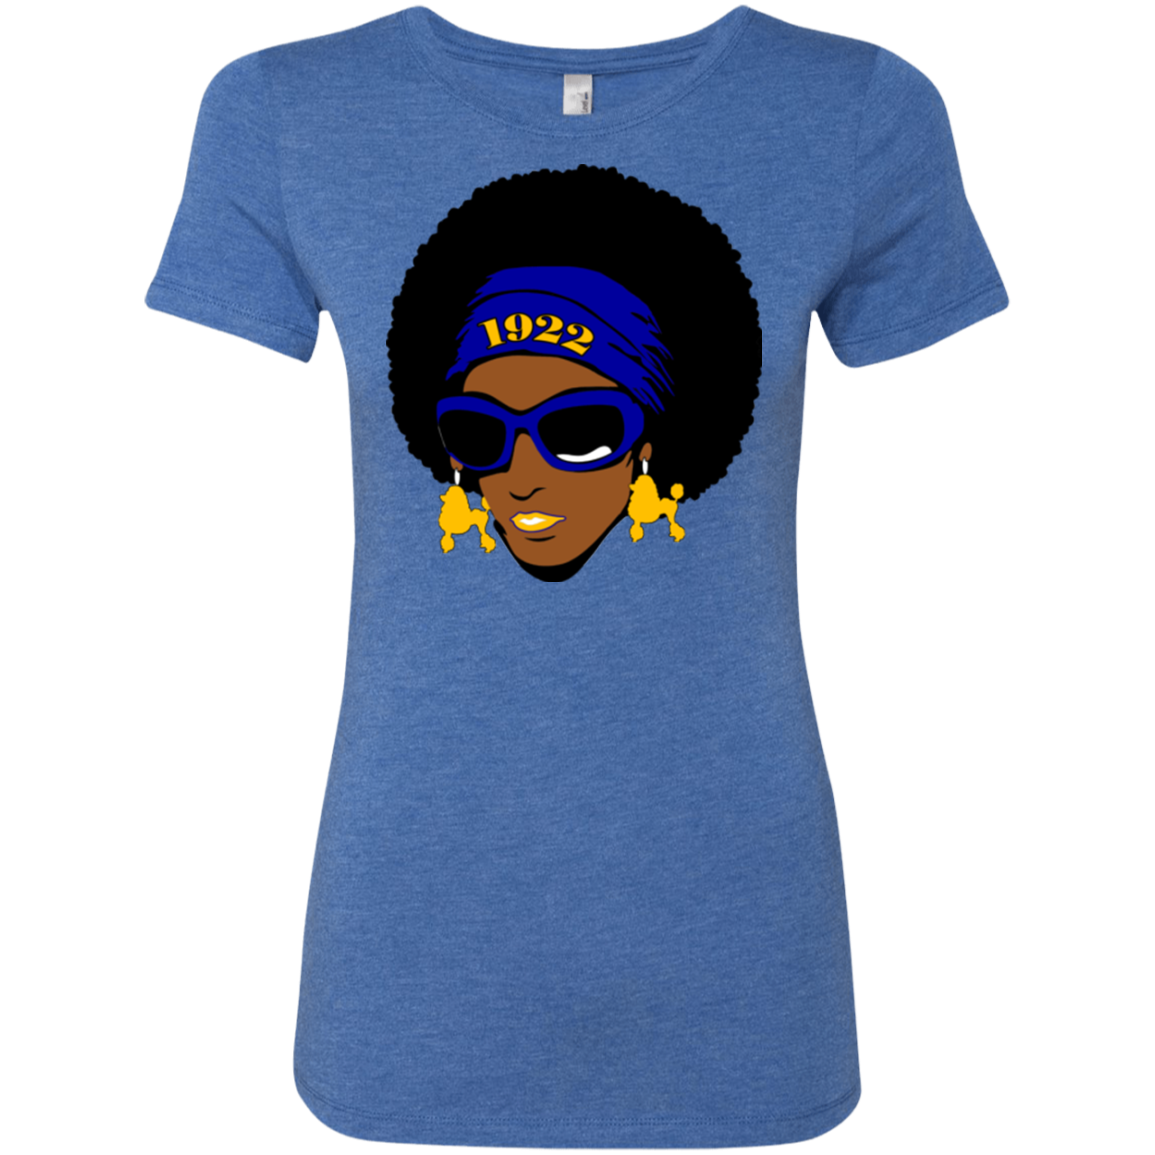 SGRHO Fitted Tri-Blend